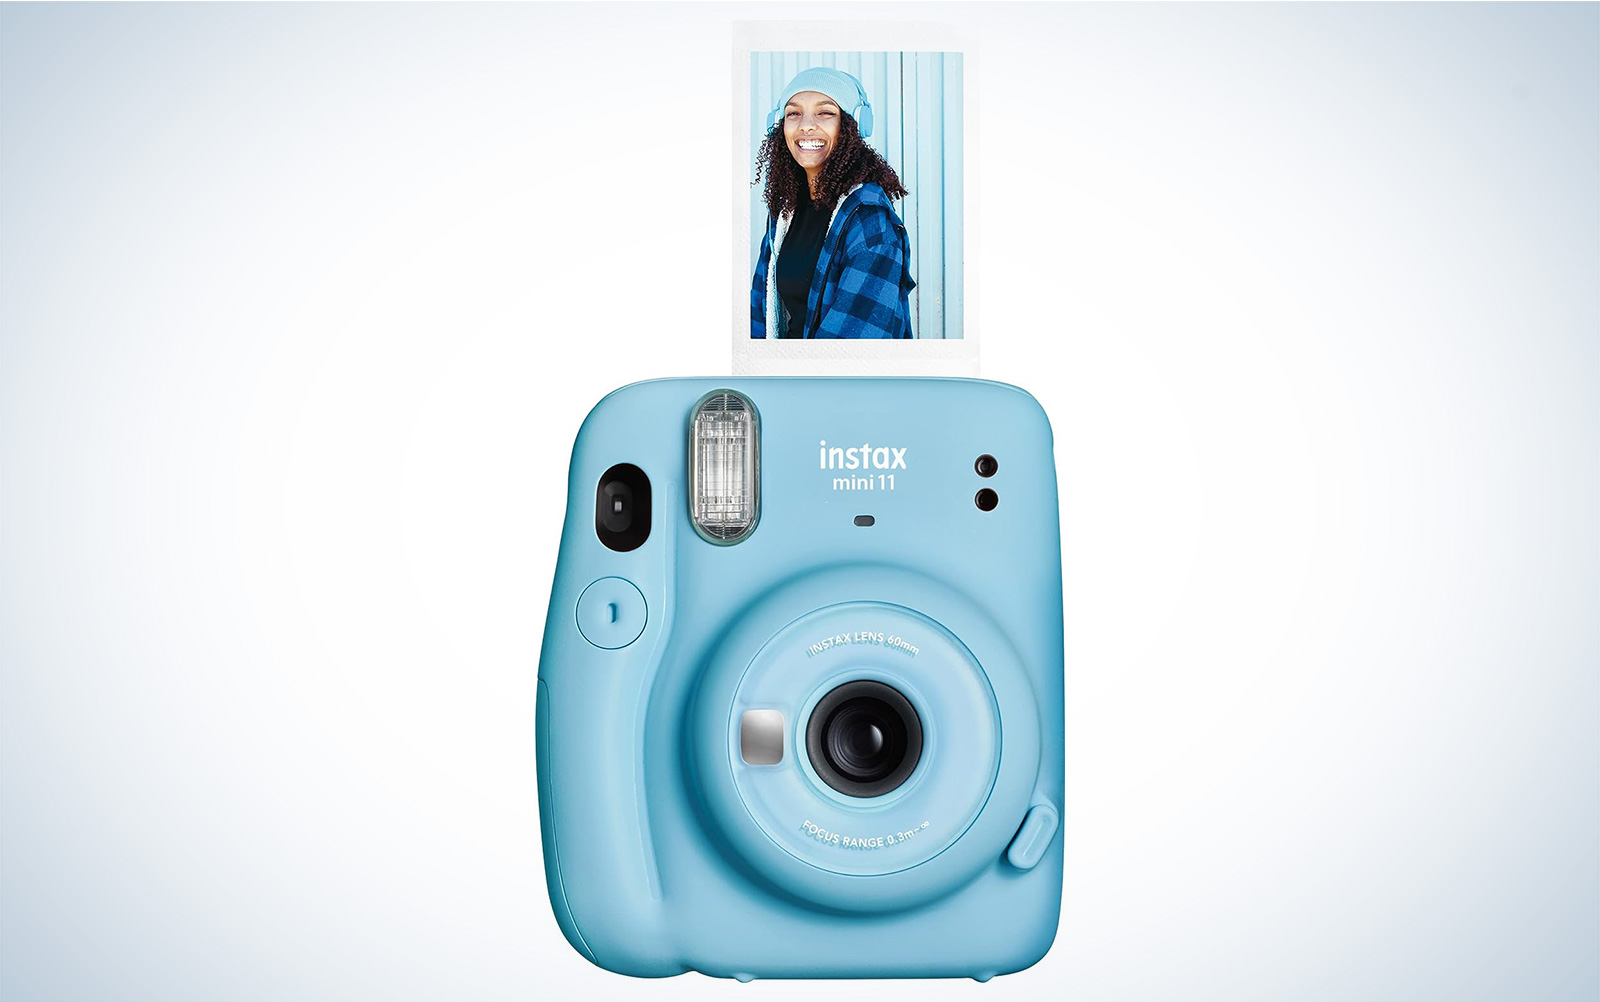 Save $40 on a Fujifilm Instax Square SQ6 instant film camera during   Prime Day